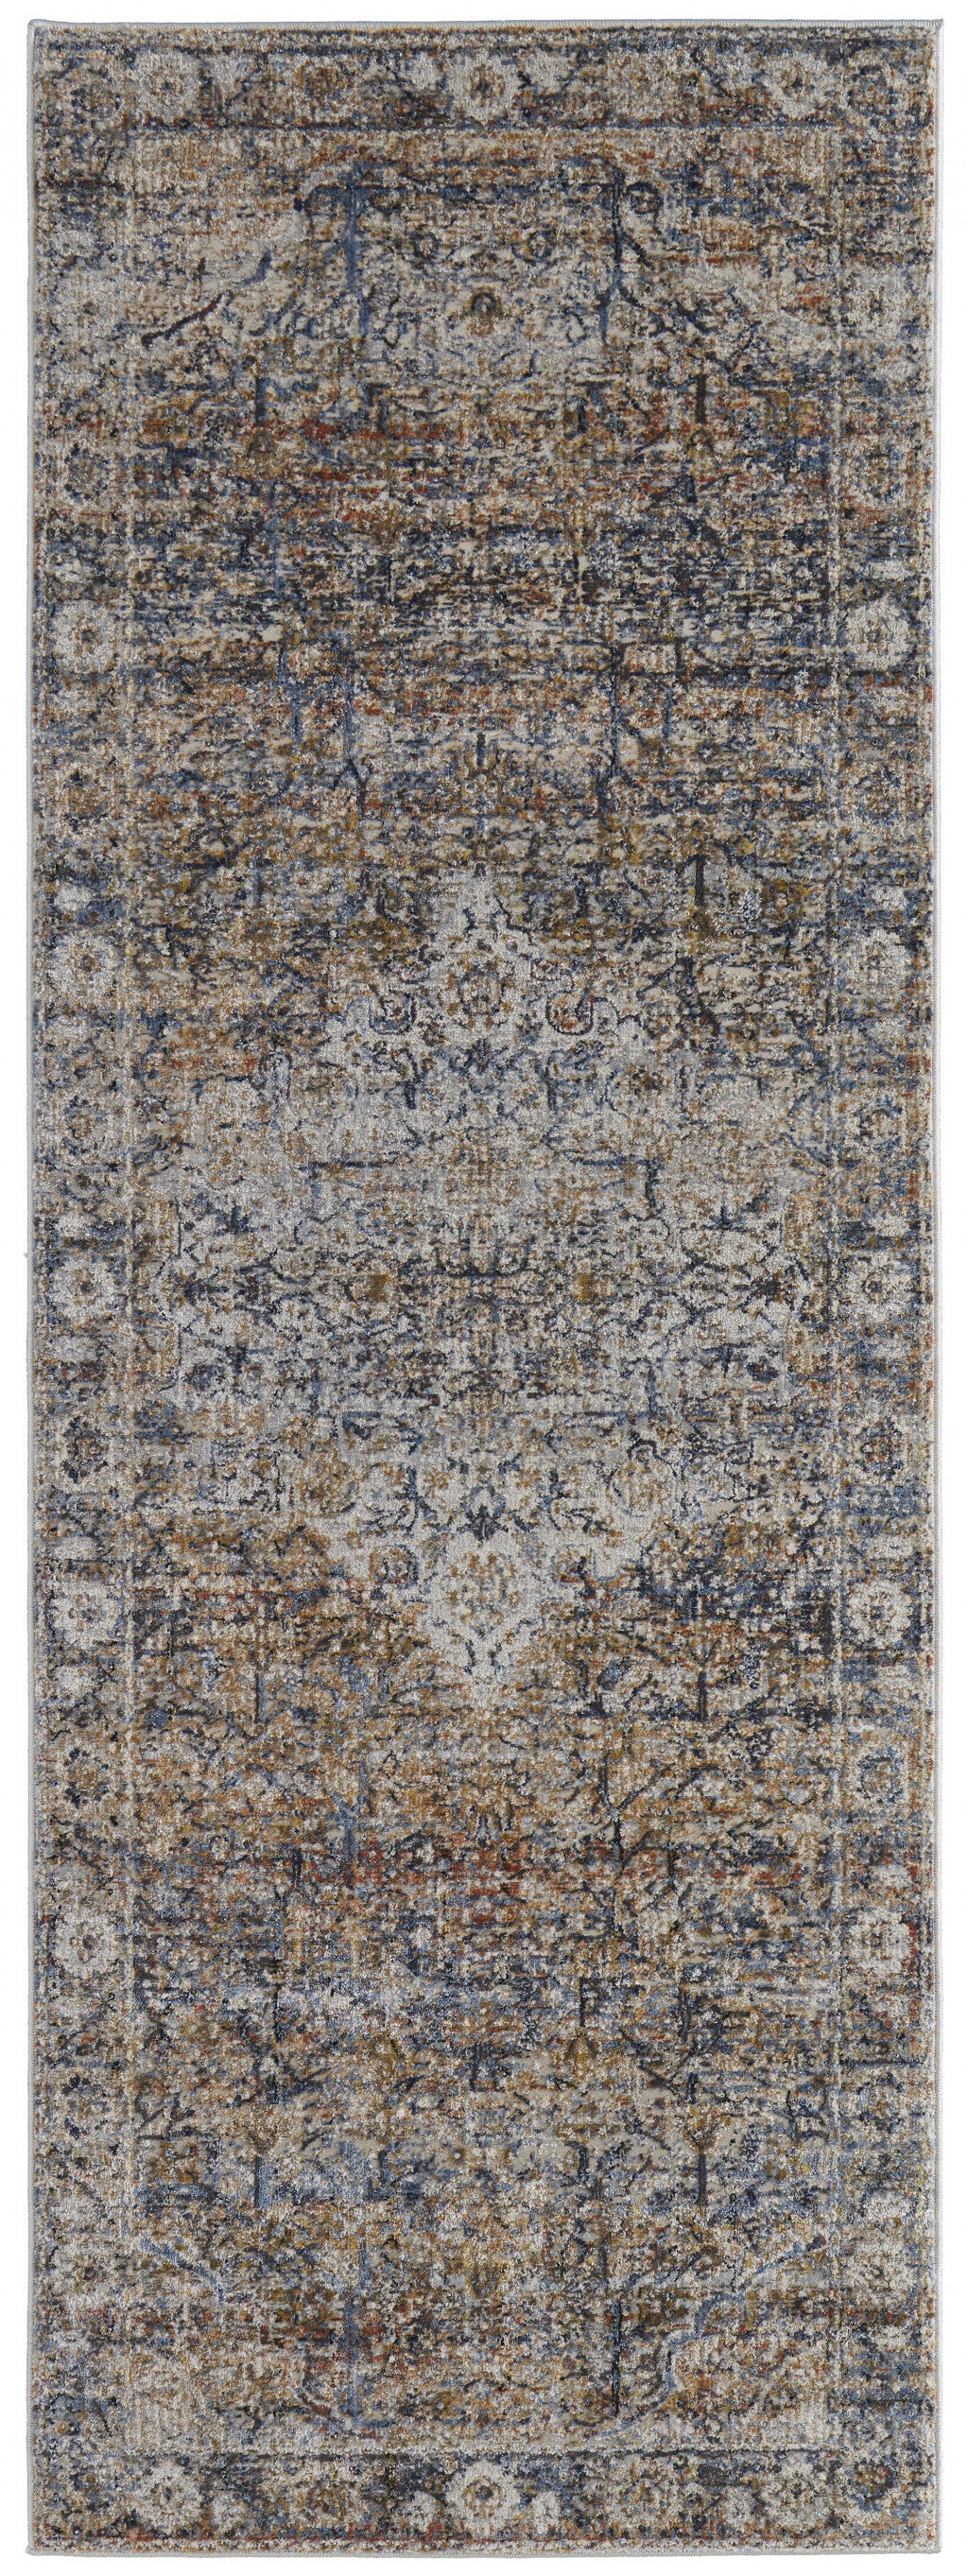 5' X 8' Tan Orange And Blue Floral Power Loom Distressed Area Rug With Fringe